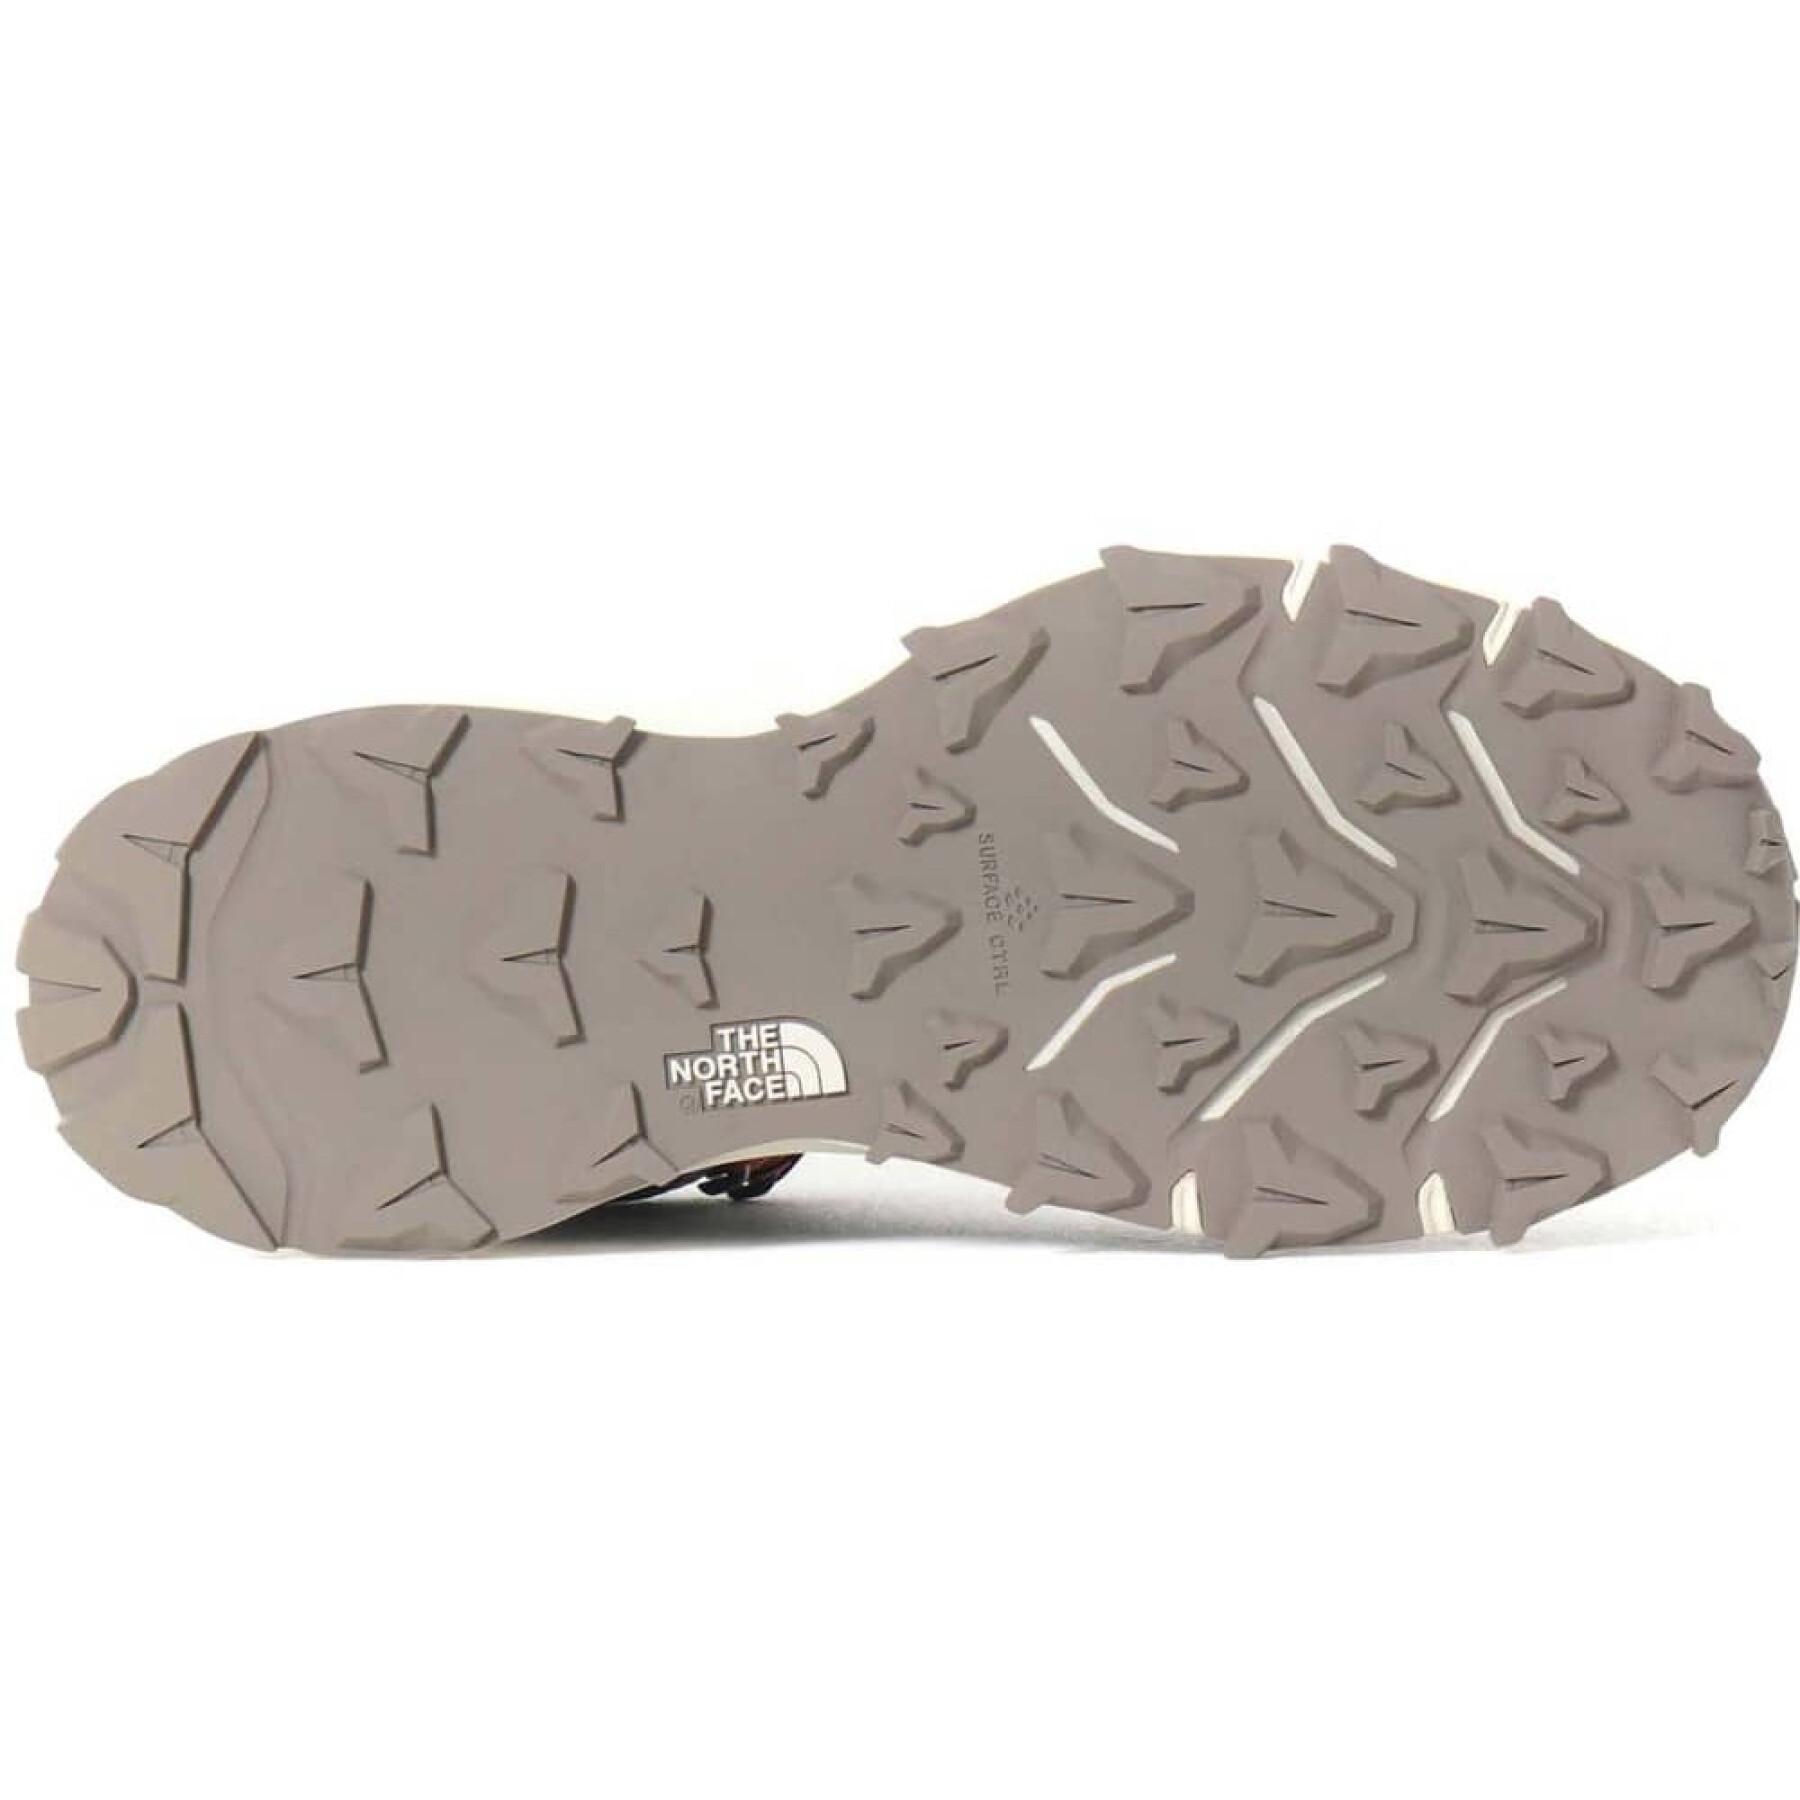 Women's hiking shoes The North Face Vectiv fastpack mid futureLight™